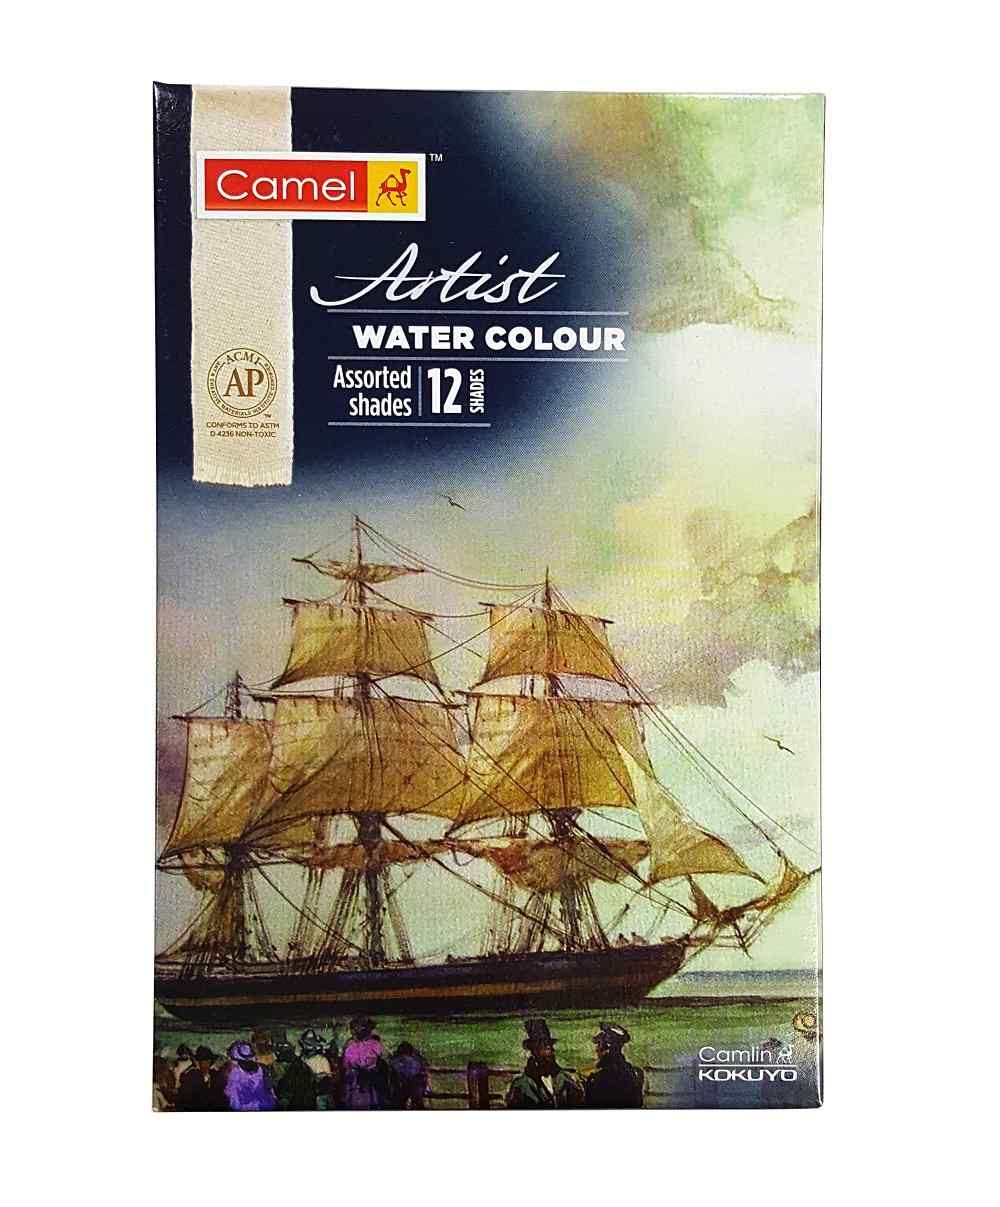 a box of Camel Artists Water Colour Tubes